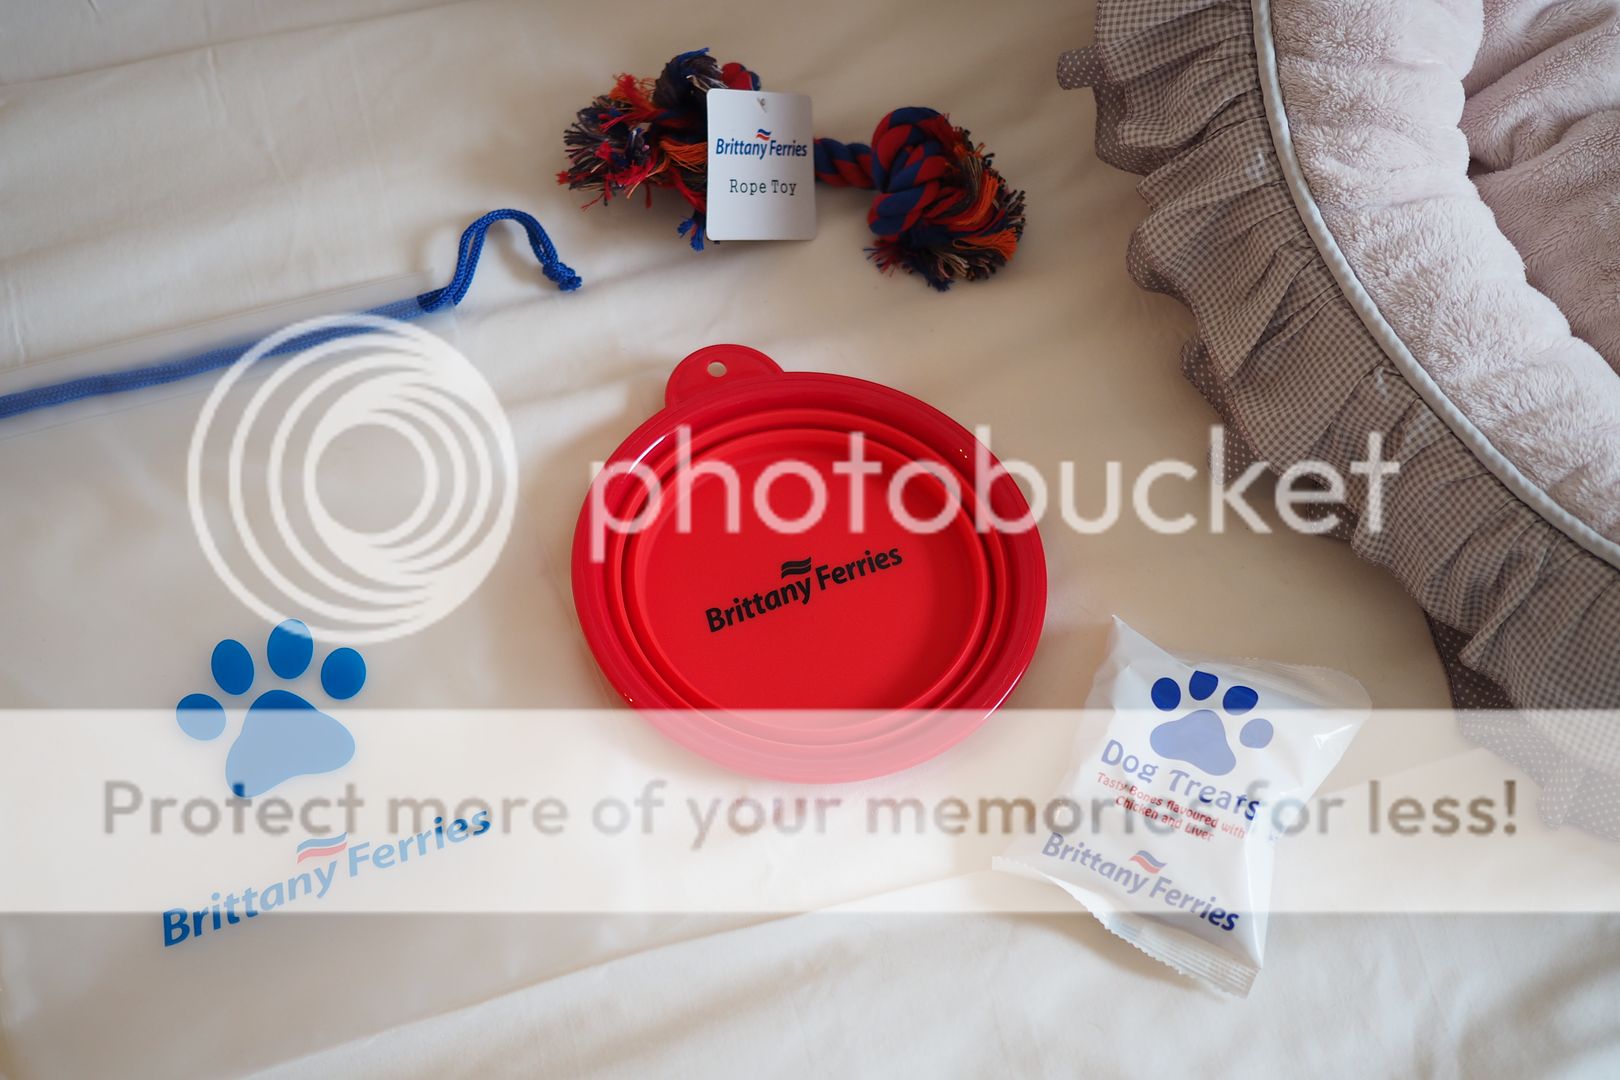  photo brittany ferries dogs pet friendly.jpg